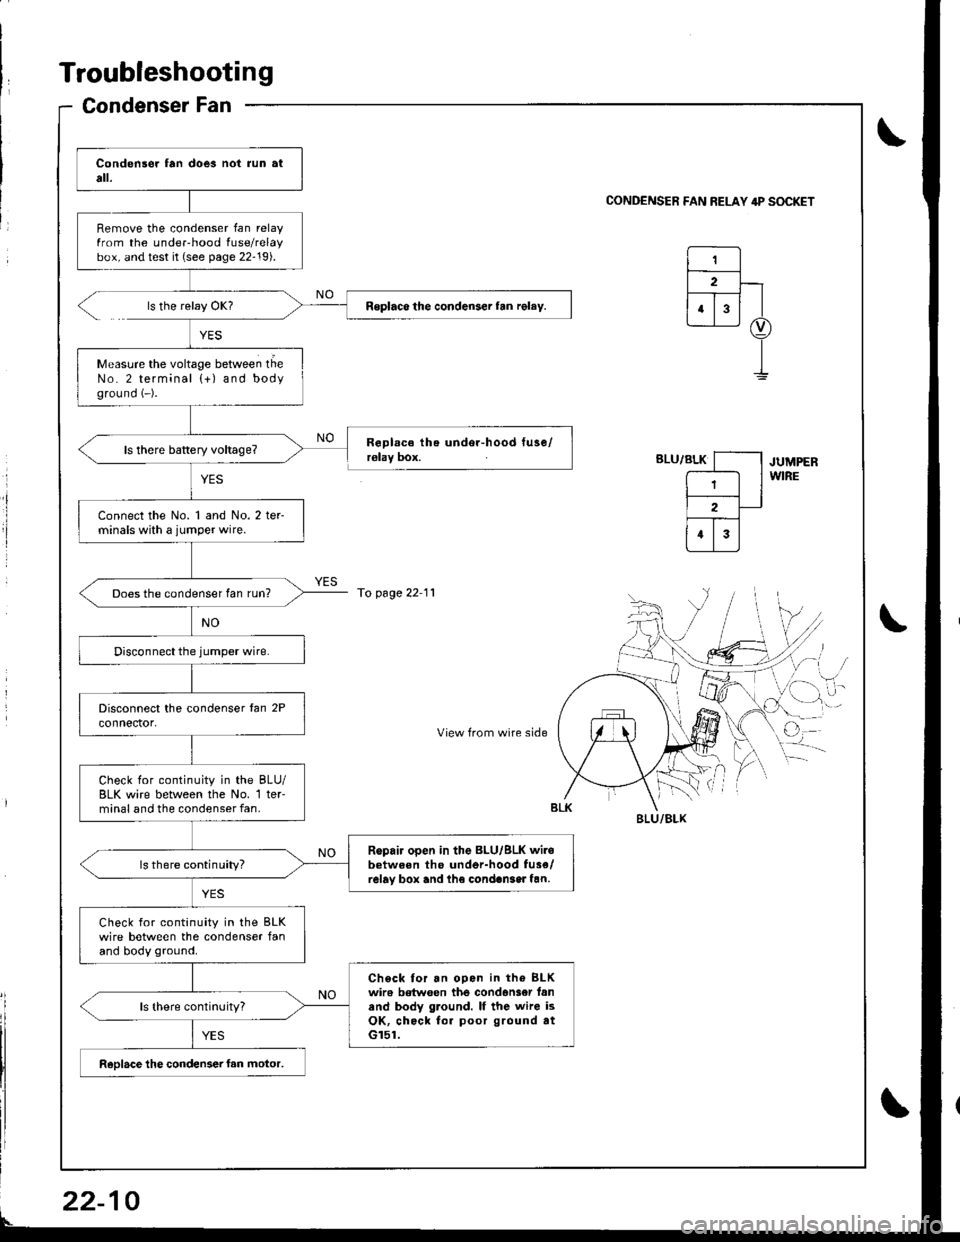 HONDA INTEGRA 1998 4.G User Guide Troubleshooting
Condenser Fan
0
Remove the condenser fan relayfrom the underhood fuse/relaybox, and test it (see page 22-19).
Roplaco the condenser fan rgley.
Measure the voltage between tlieNo. 2 ter